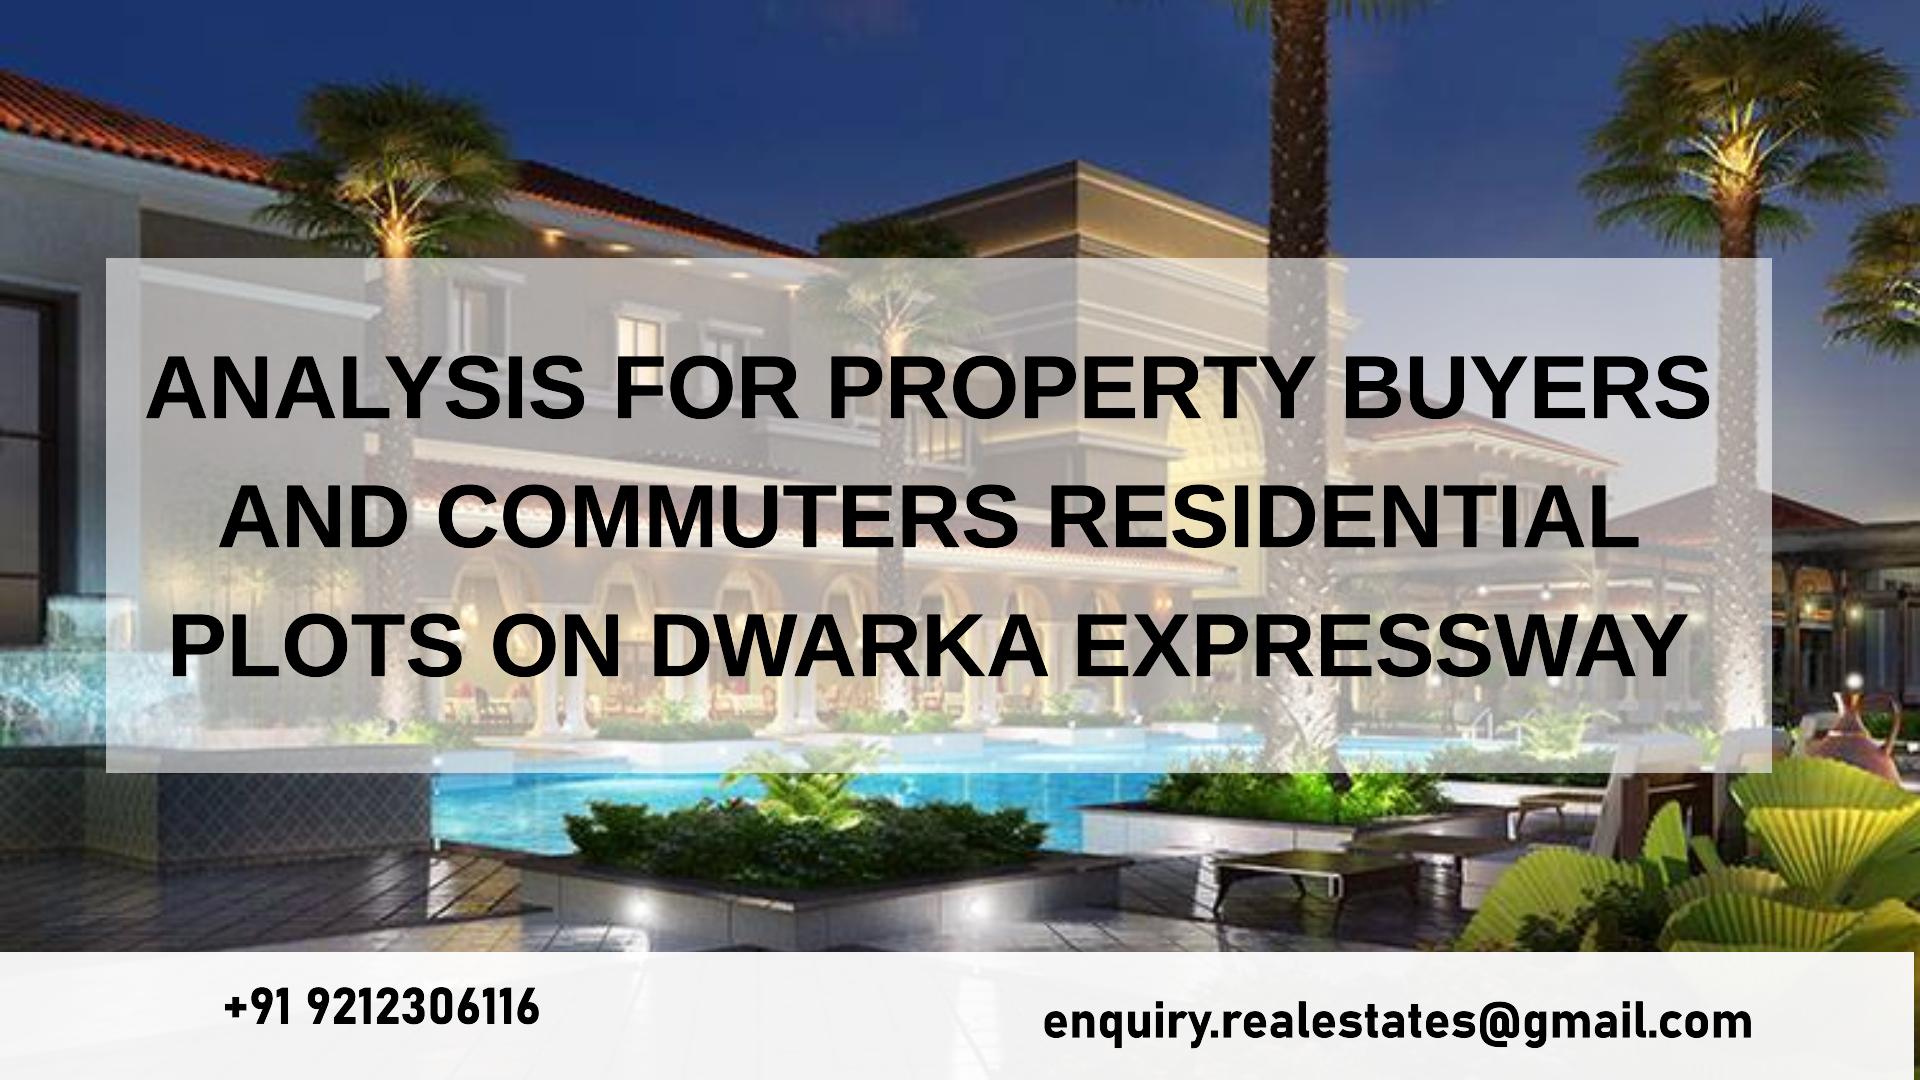 Analysis for Property Buyers and Commuters Residential Plots On Dwarka Expressway